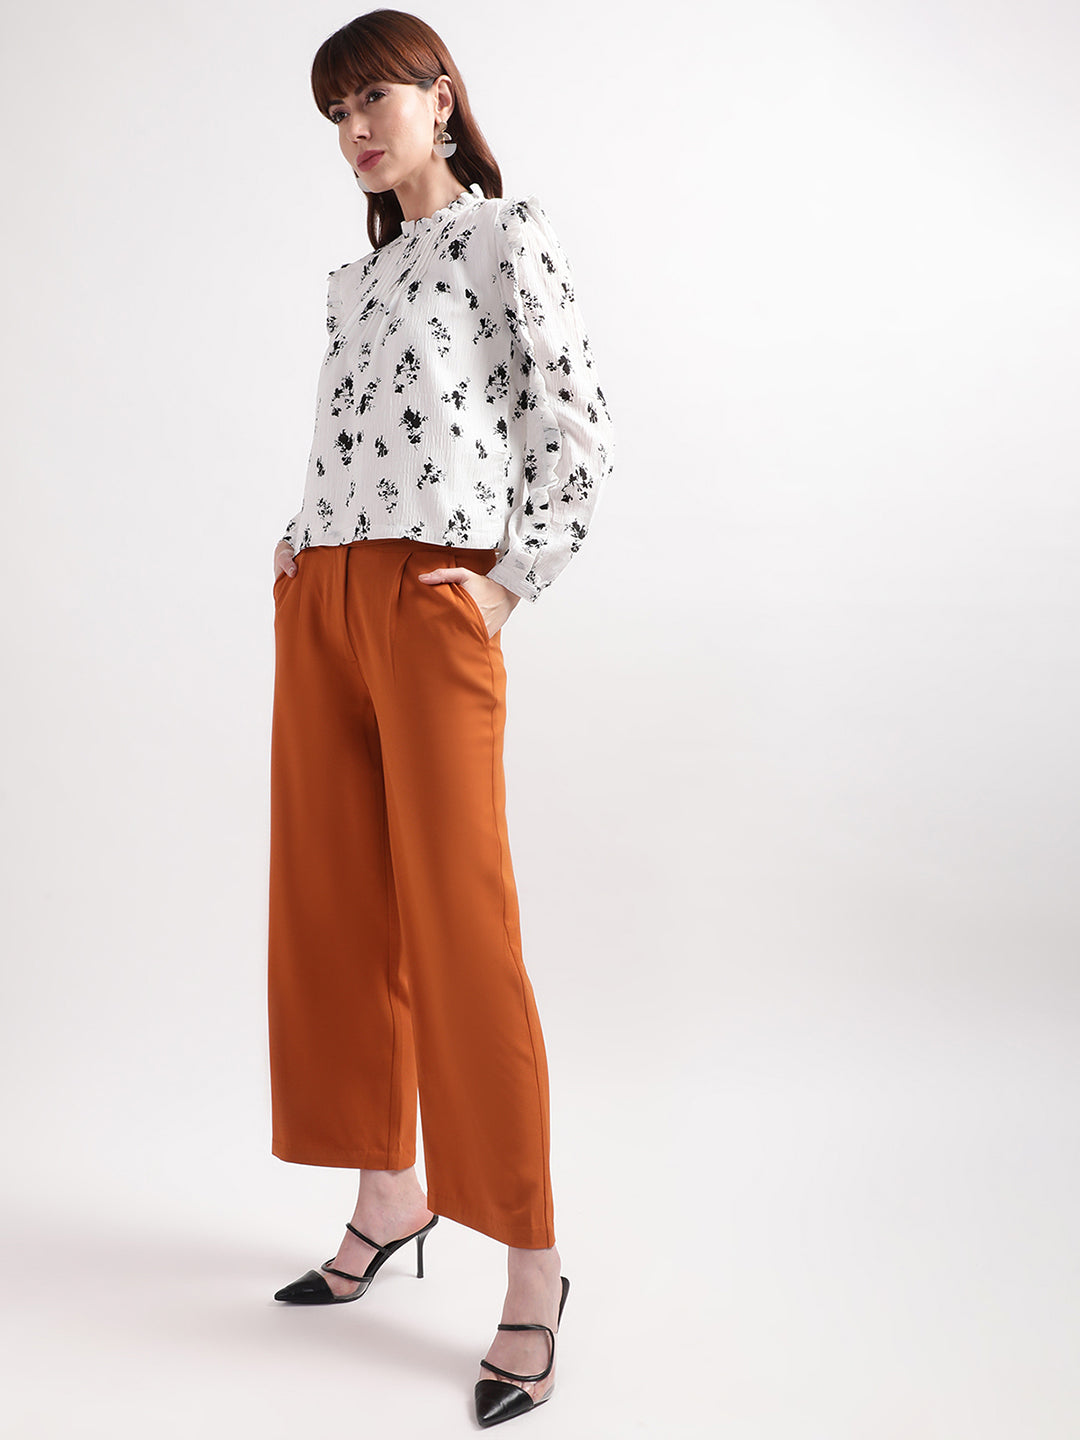 Centre Stage Women White Printed Band Collar Top